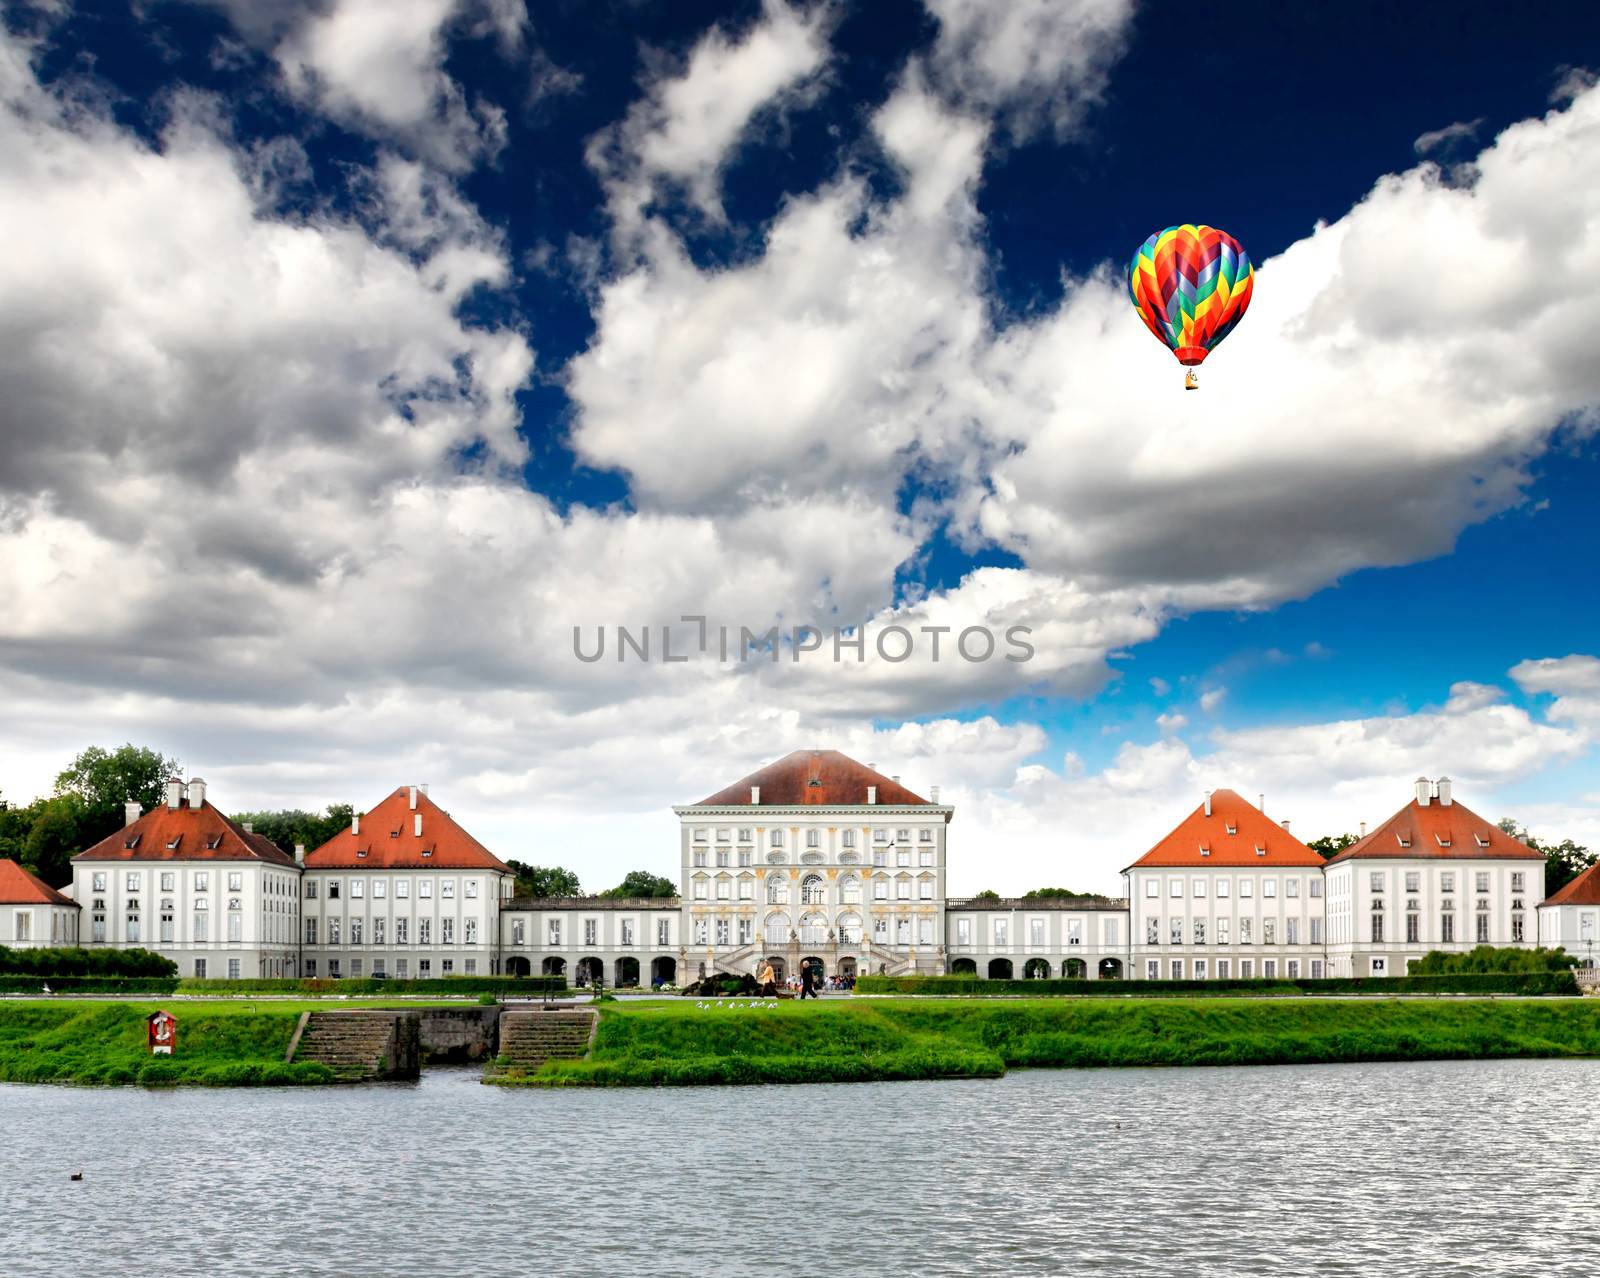 The Nymphenburg Palace by gary718